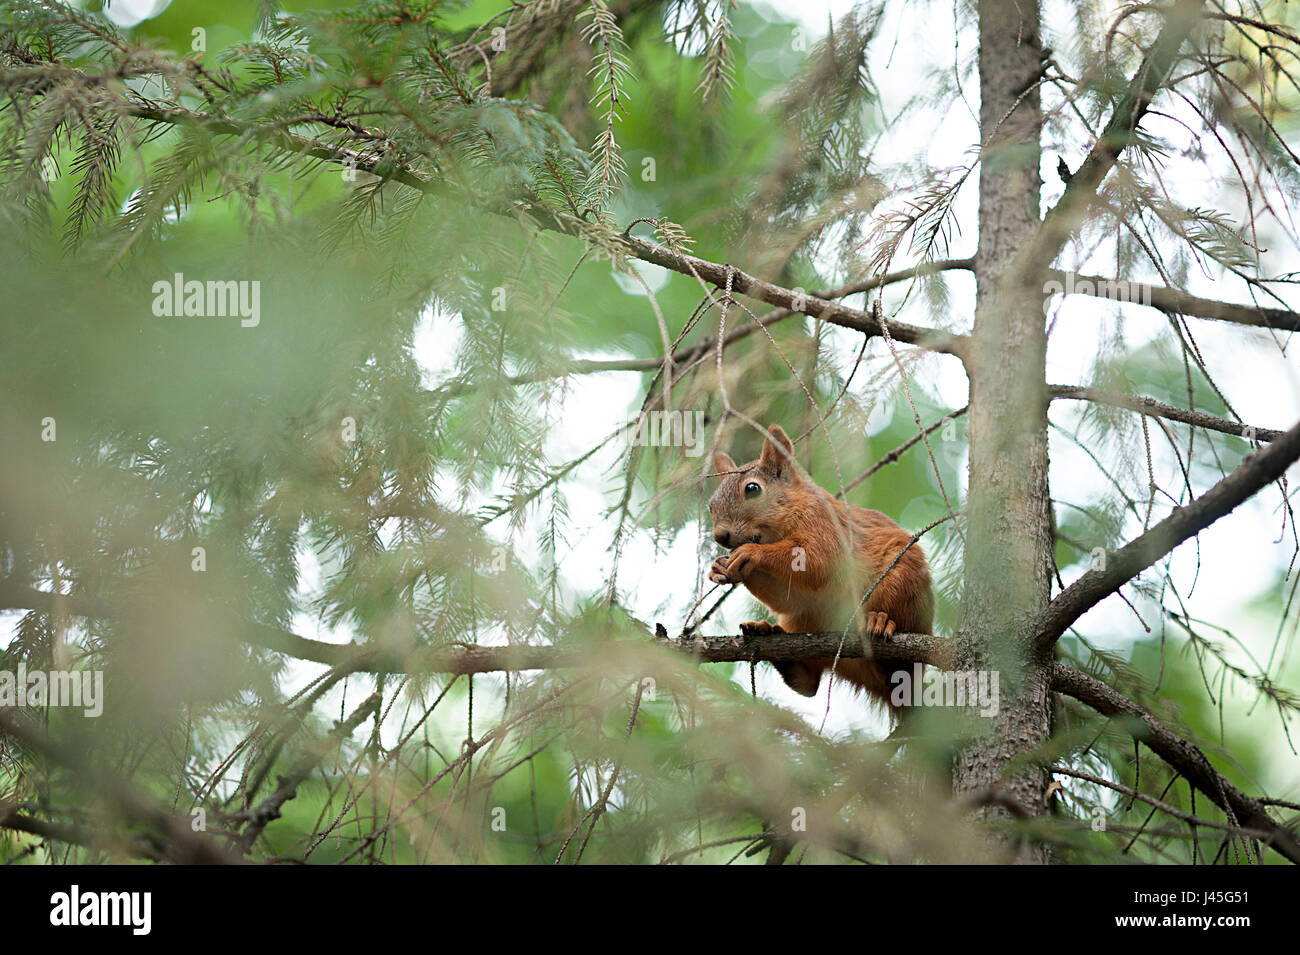 Squirrel red fur funny pets autumn forest on background wild nature animal thematic Sciurus vulgaris rodent Stock Photo